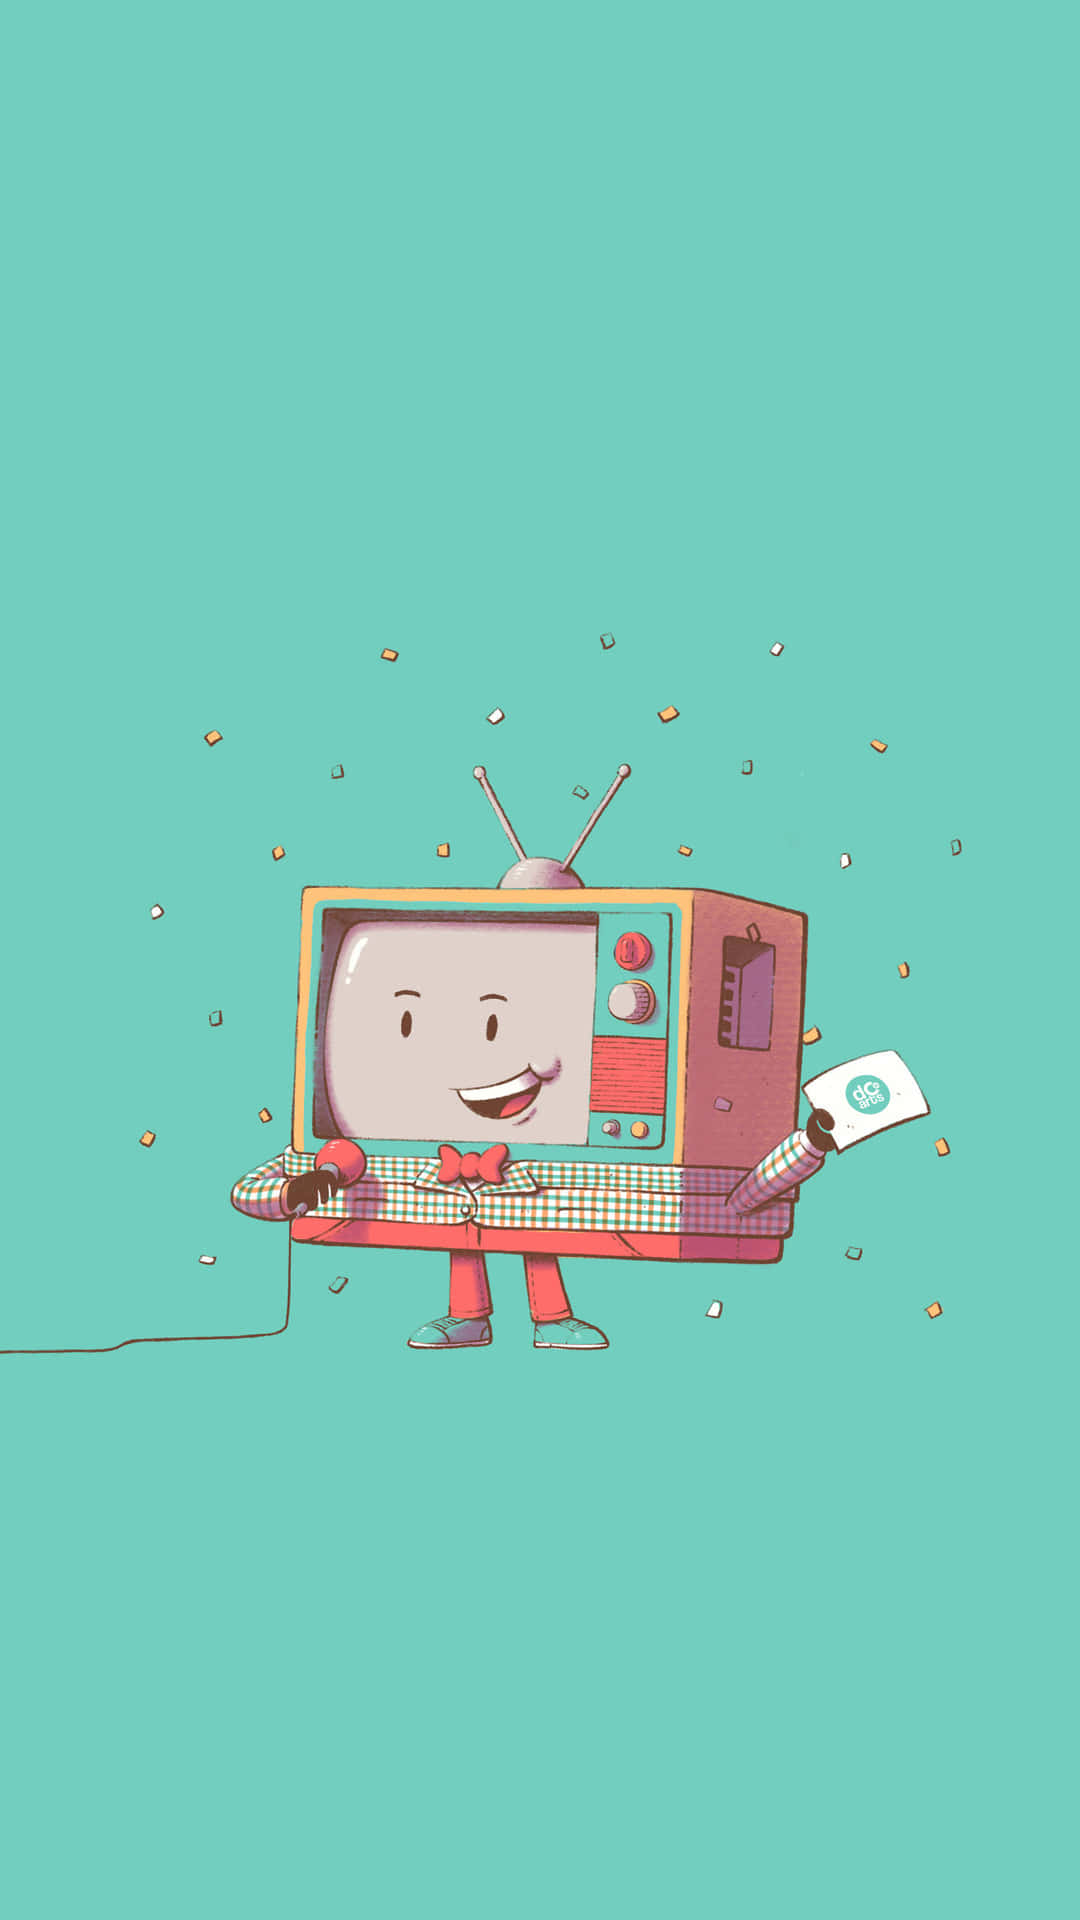 Cartoon Tv With A Man Holding A Remote